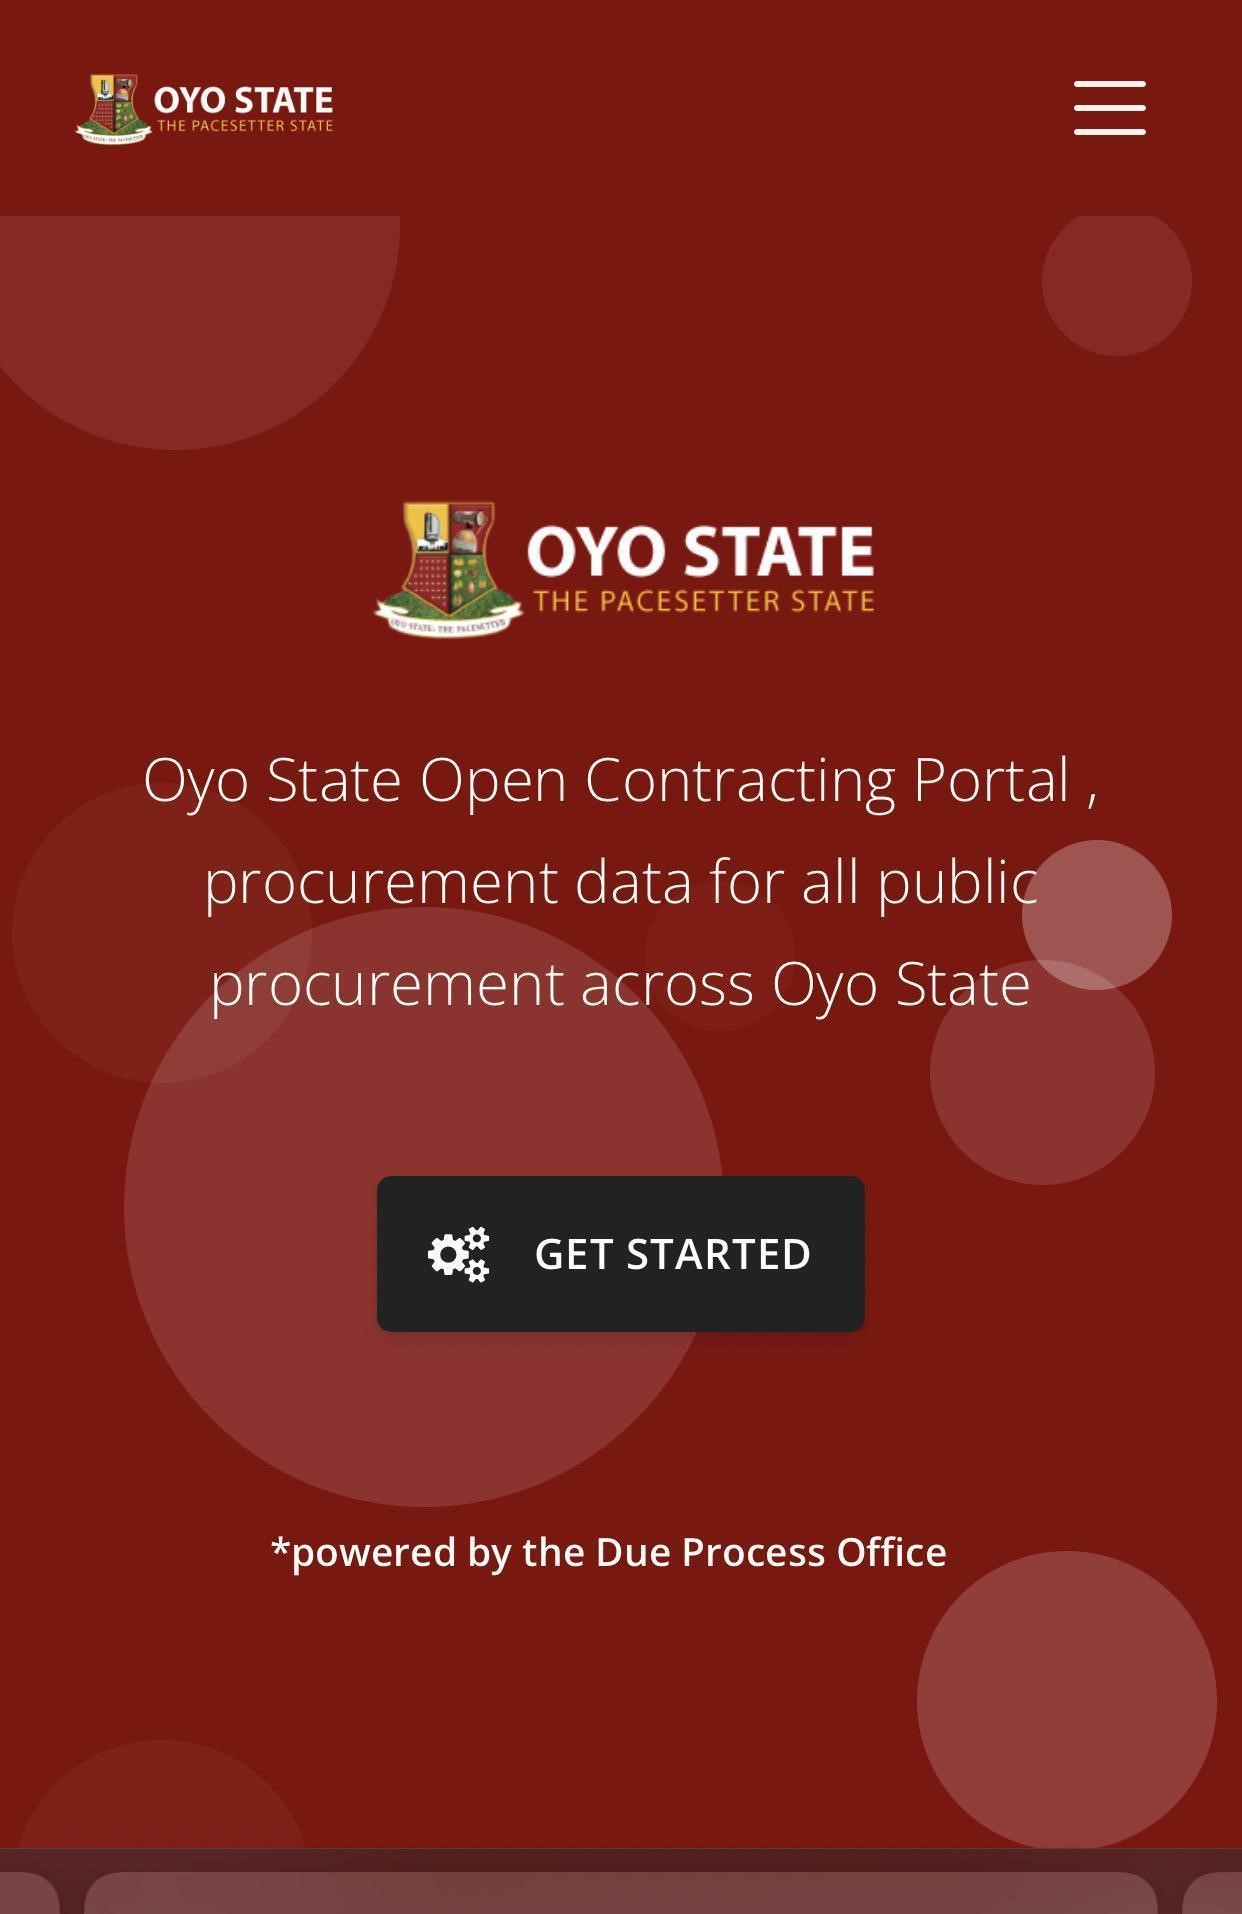  The screenshot of Oyo State open contracting portal without uploading any document on the awarded projects in the State